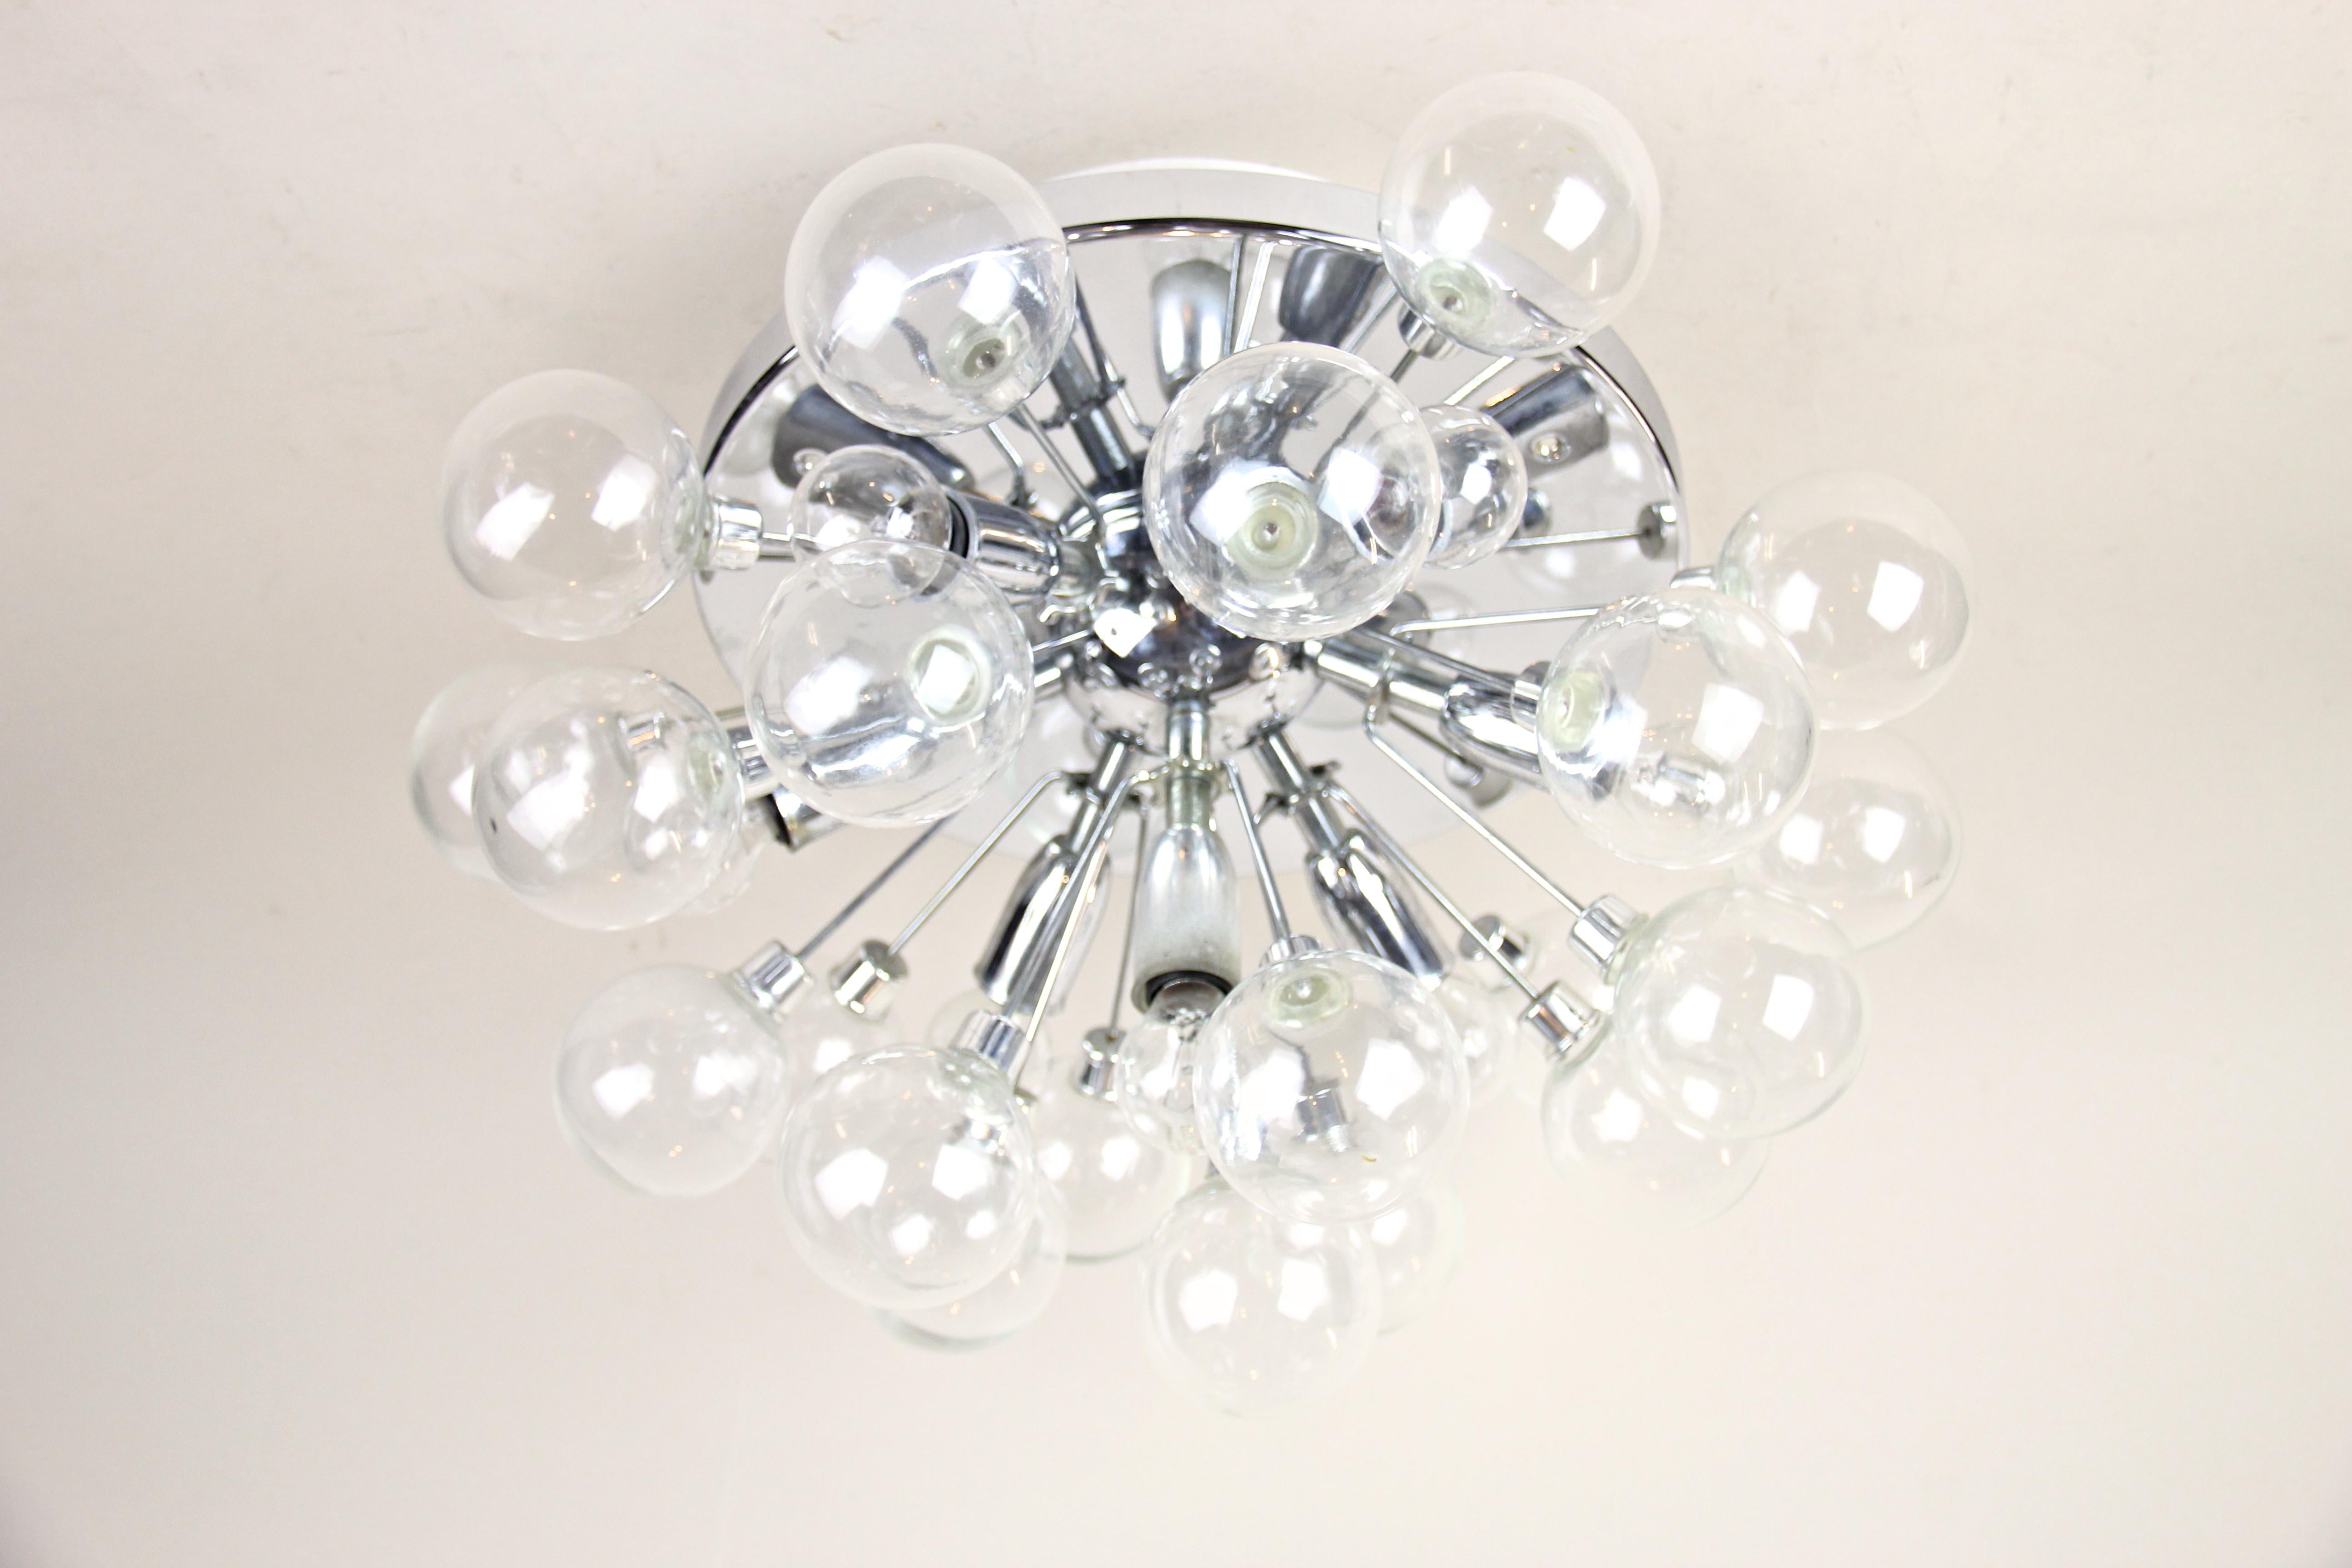 Marvelous midcentury Sputnik flushmount light out of Austria from circa 1960s. This designer ceiling light impresses with seven-light bulbs surrounded by twenty-one mouth blown glass spheres. In combination with the chromed surface this midcentury